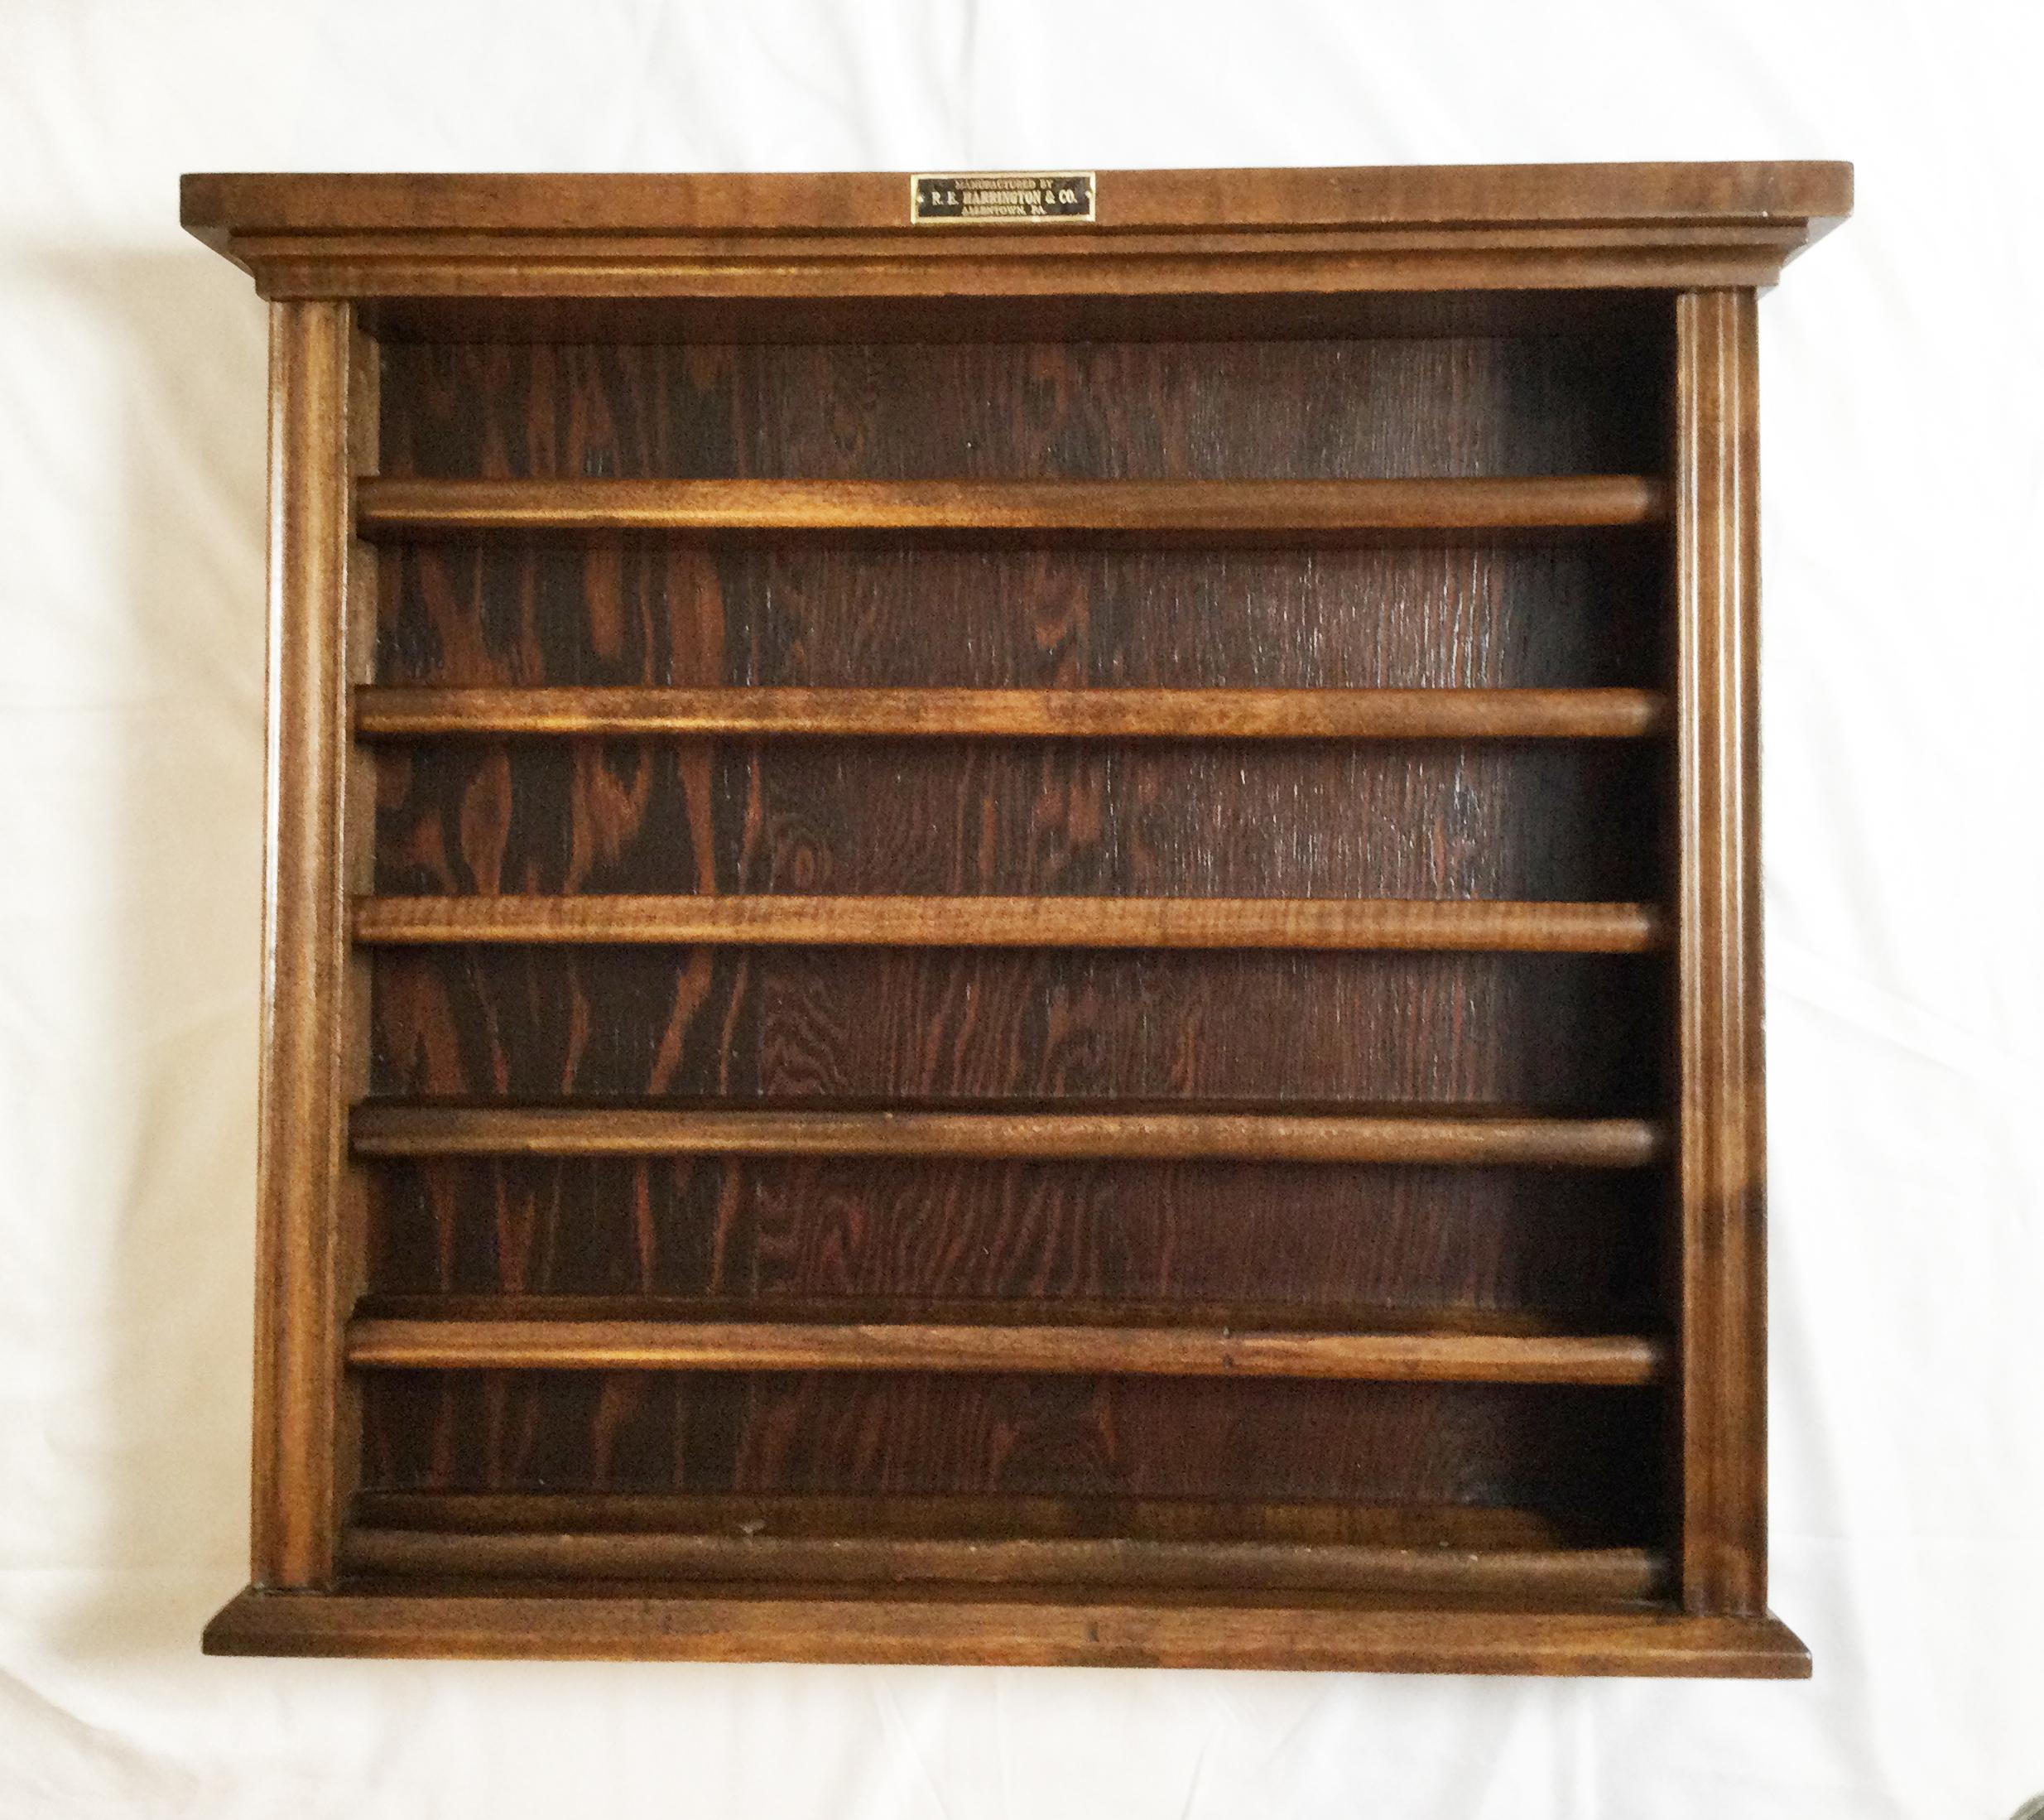 This is a strong, sturdy and wellmade pool ball / billiard ball rack. It is made of wood and has six shelves. The piece was made in Allentown, PA and has its original metal maker’s plaque. This rack shows off six shelves.
 